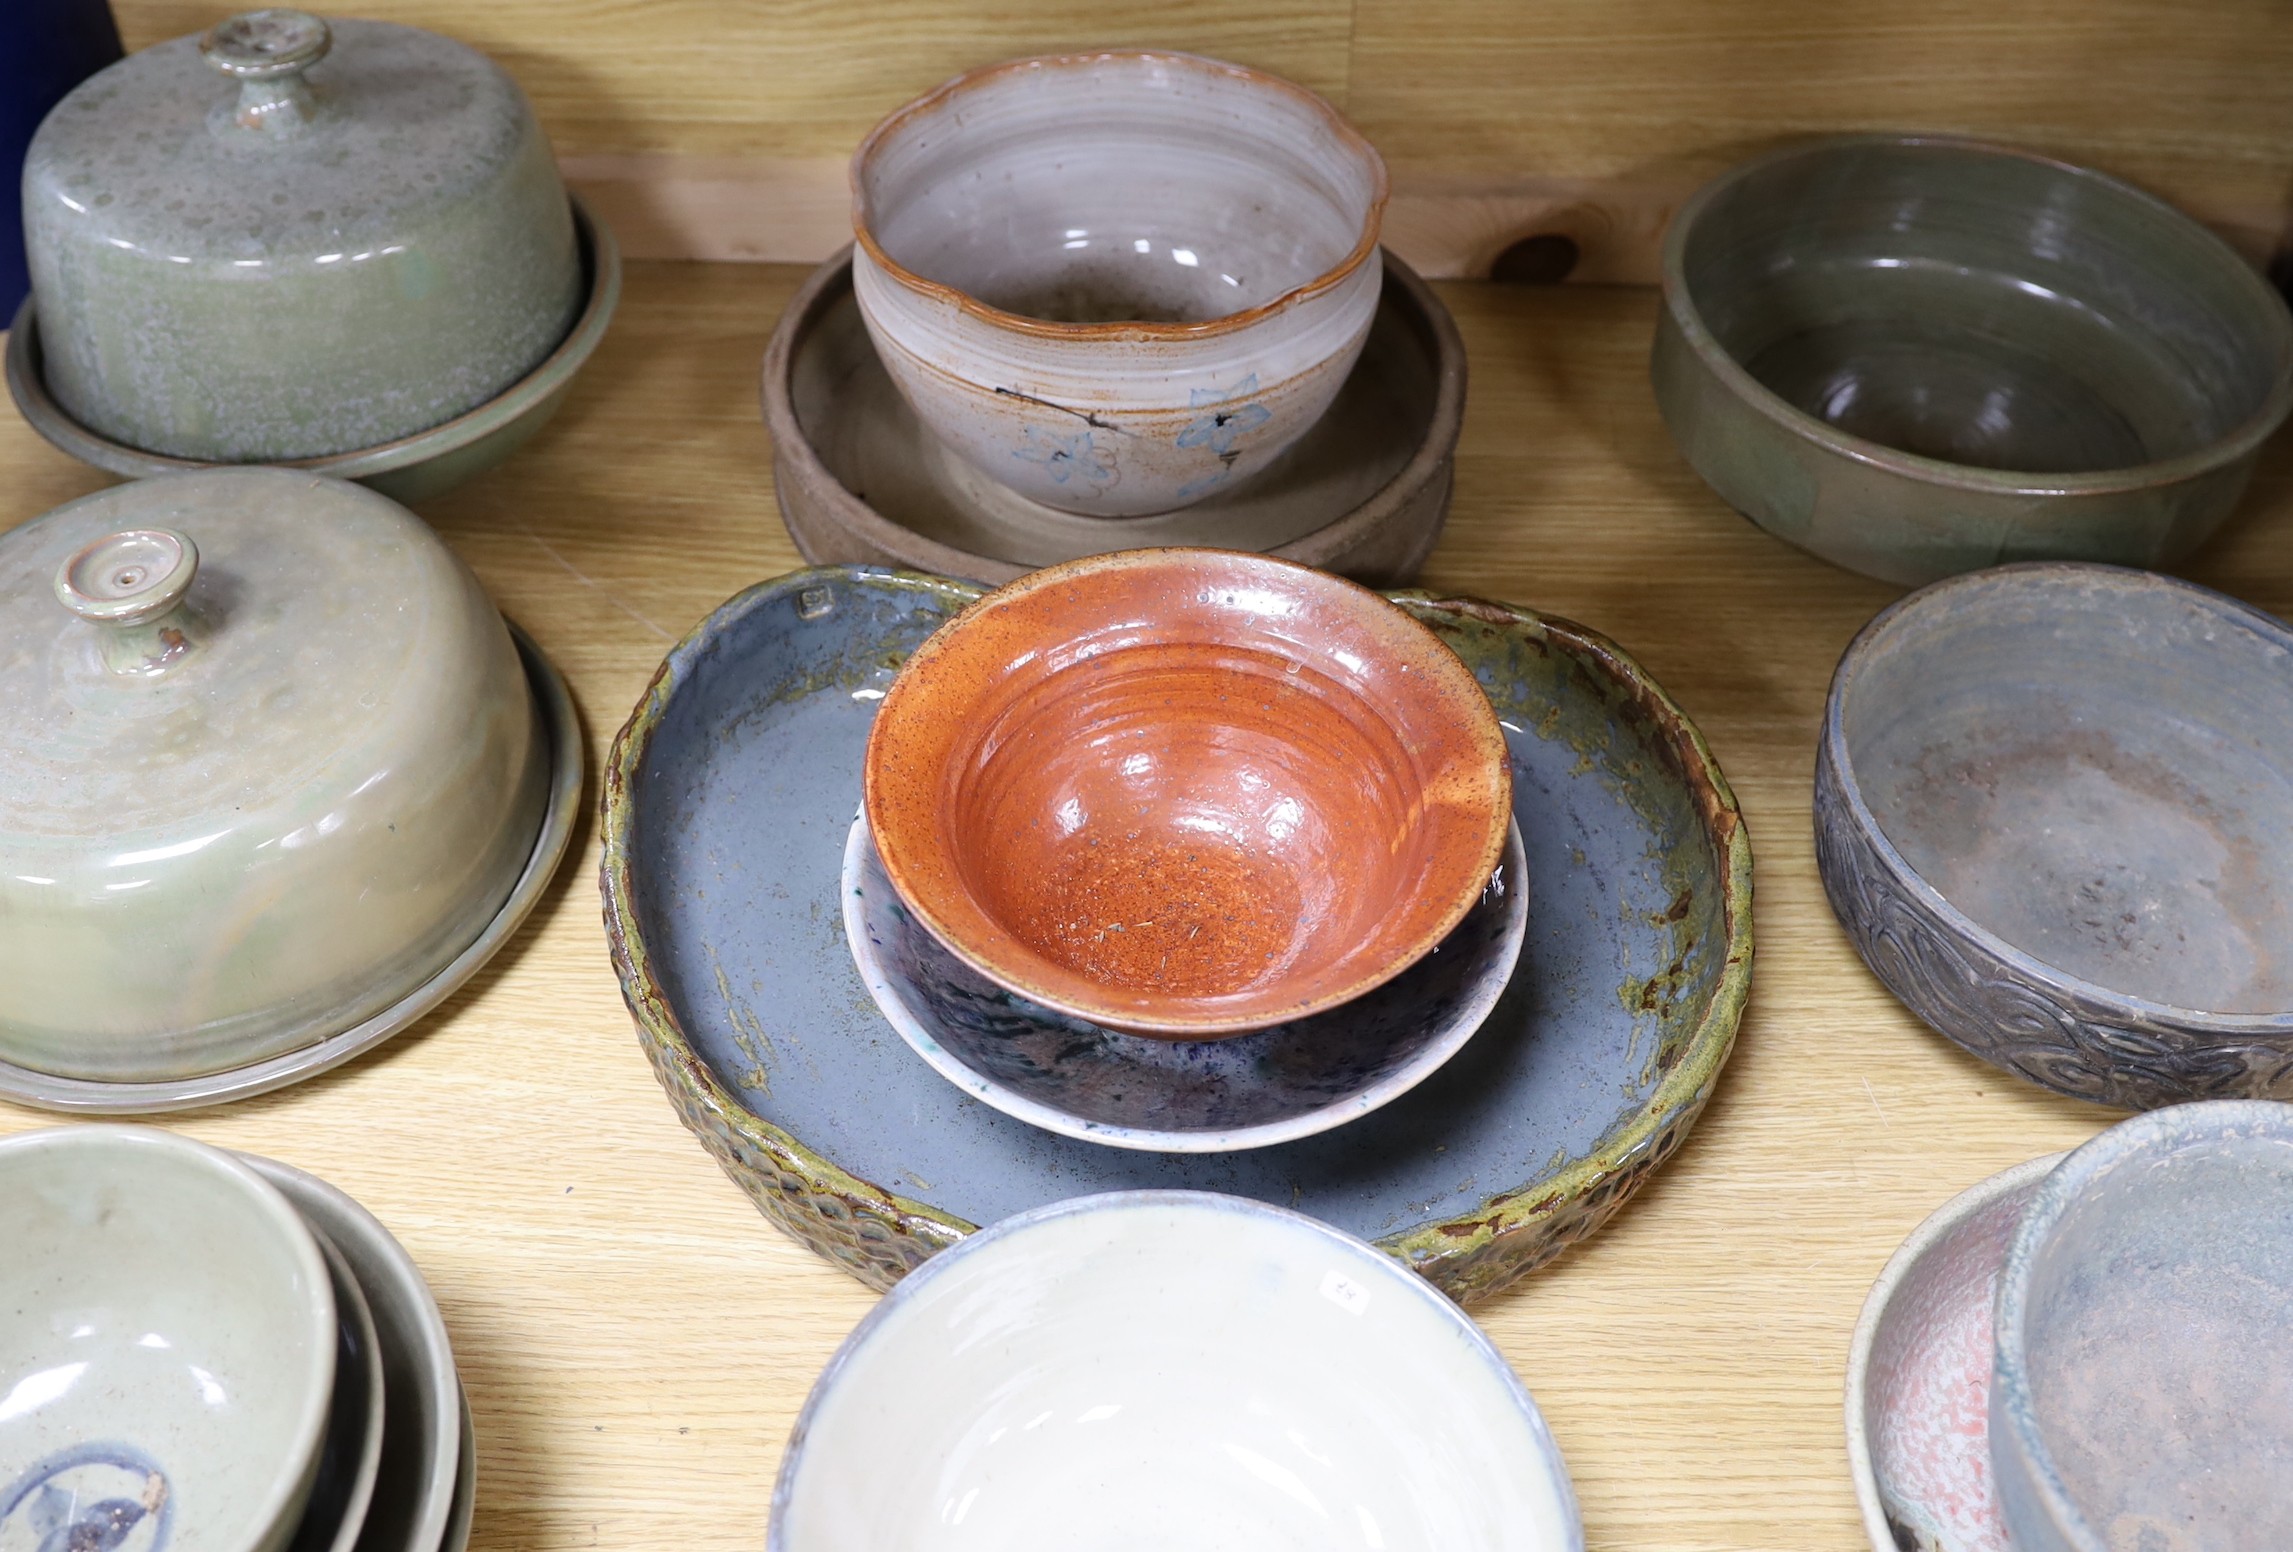 Susan Threadgold - a large group of studio pottery bowls, two covered dishes and a bonsai dish (15)